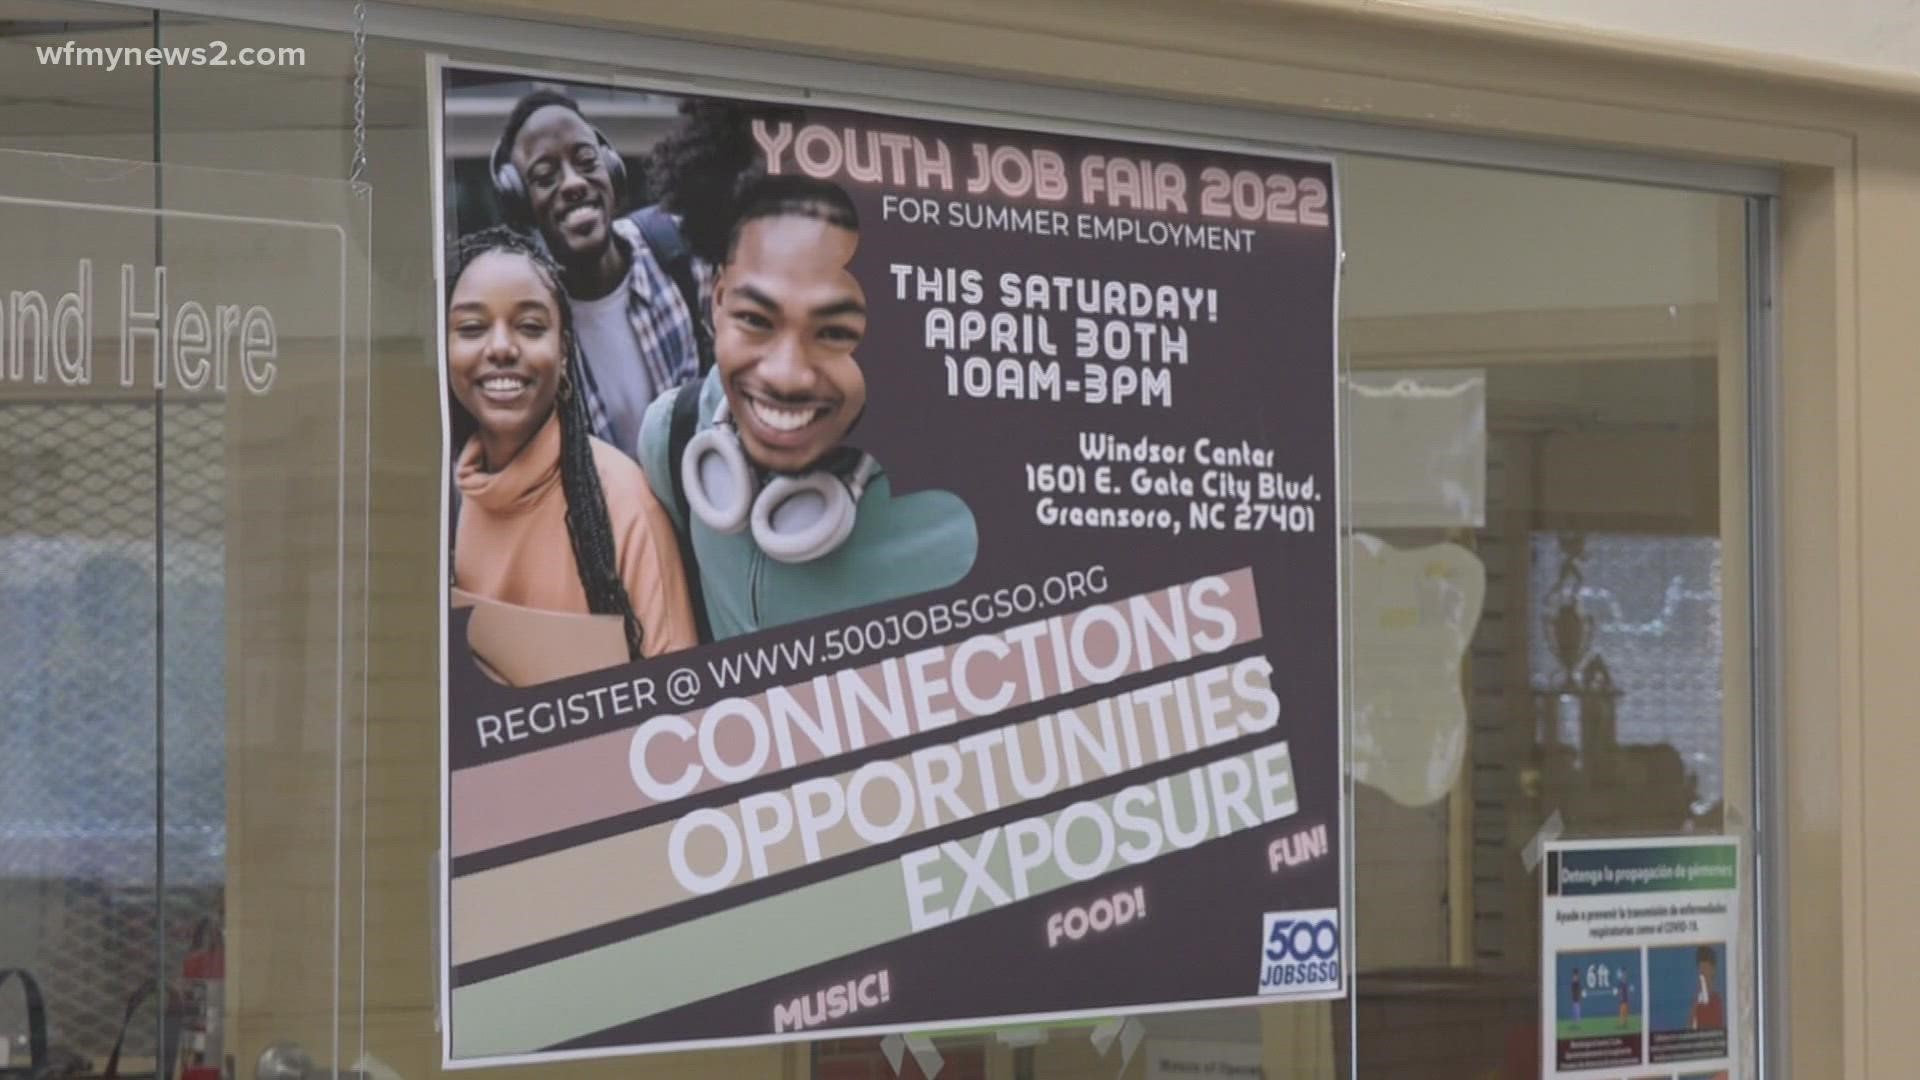 The program, created by Greensboro Police Chief Brian James, aims to connect local teens with summer job opportunities.